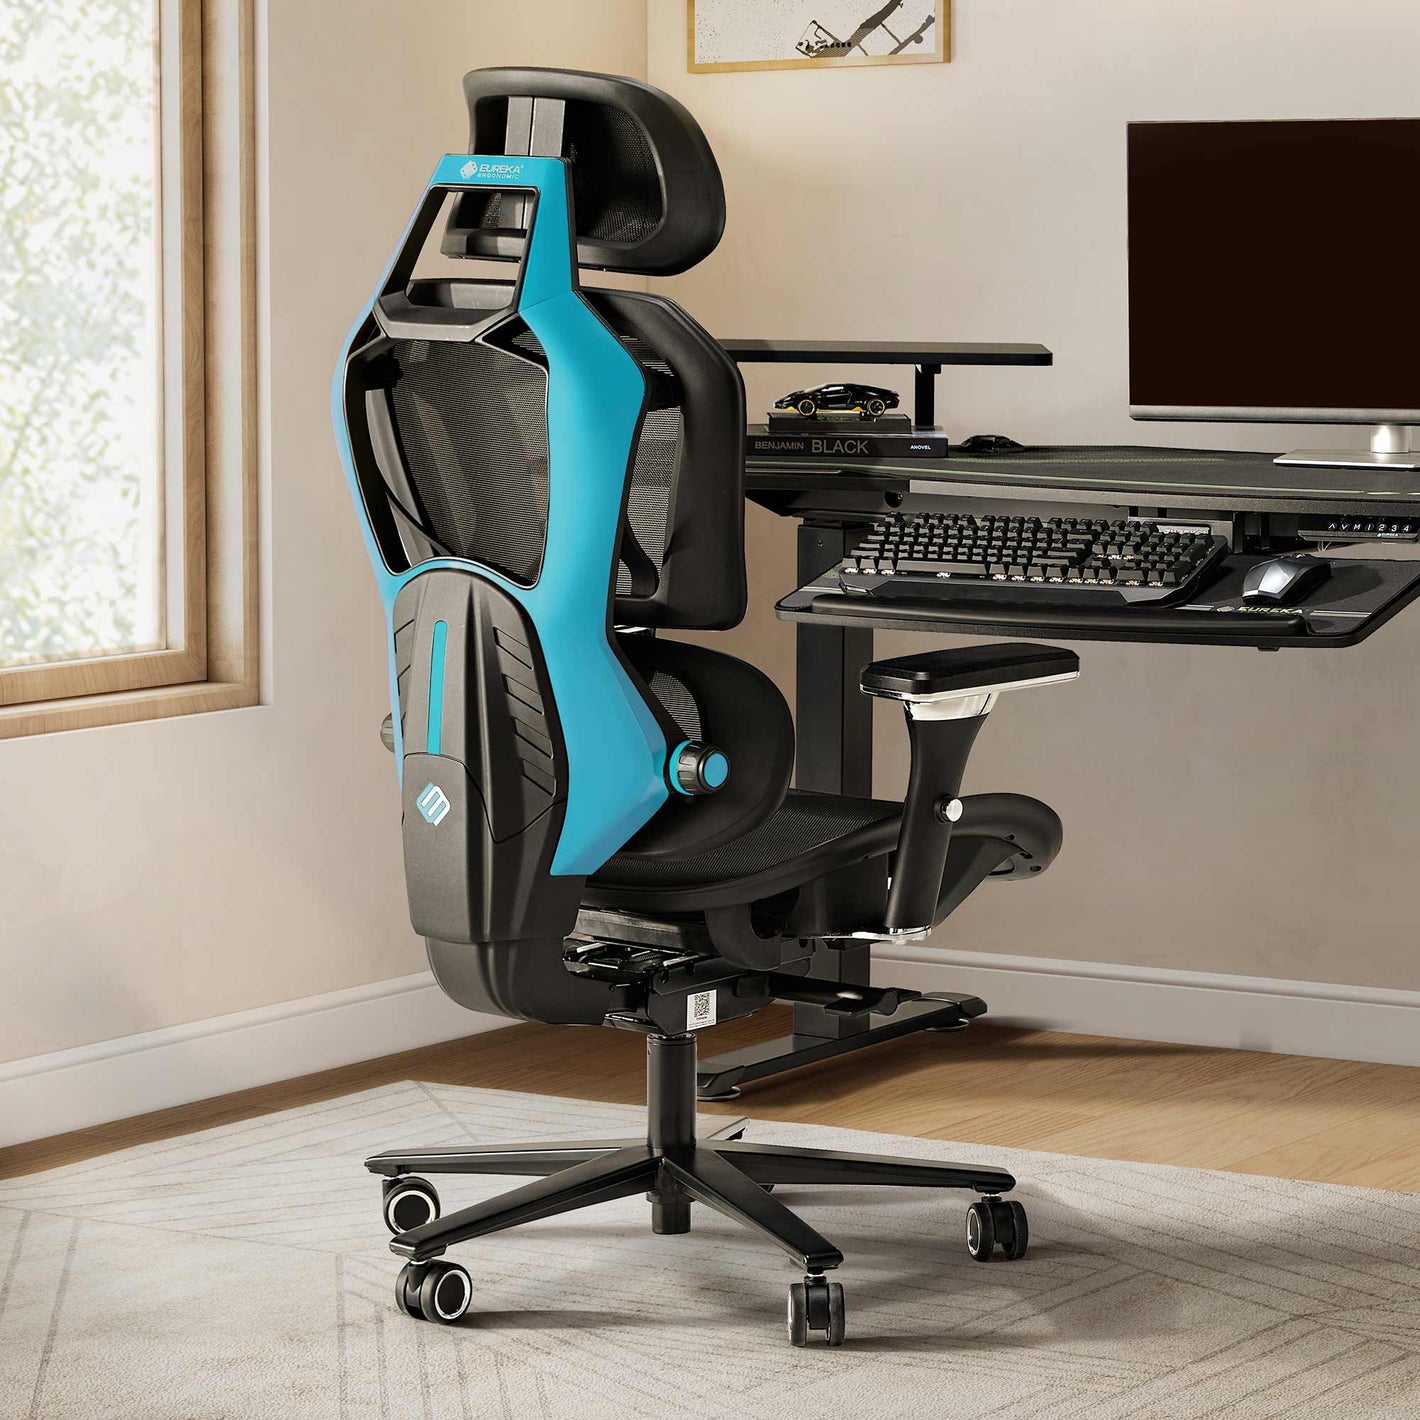 Blue | office chair for lower back pain in home office